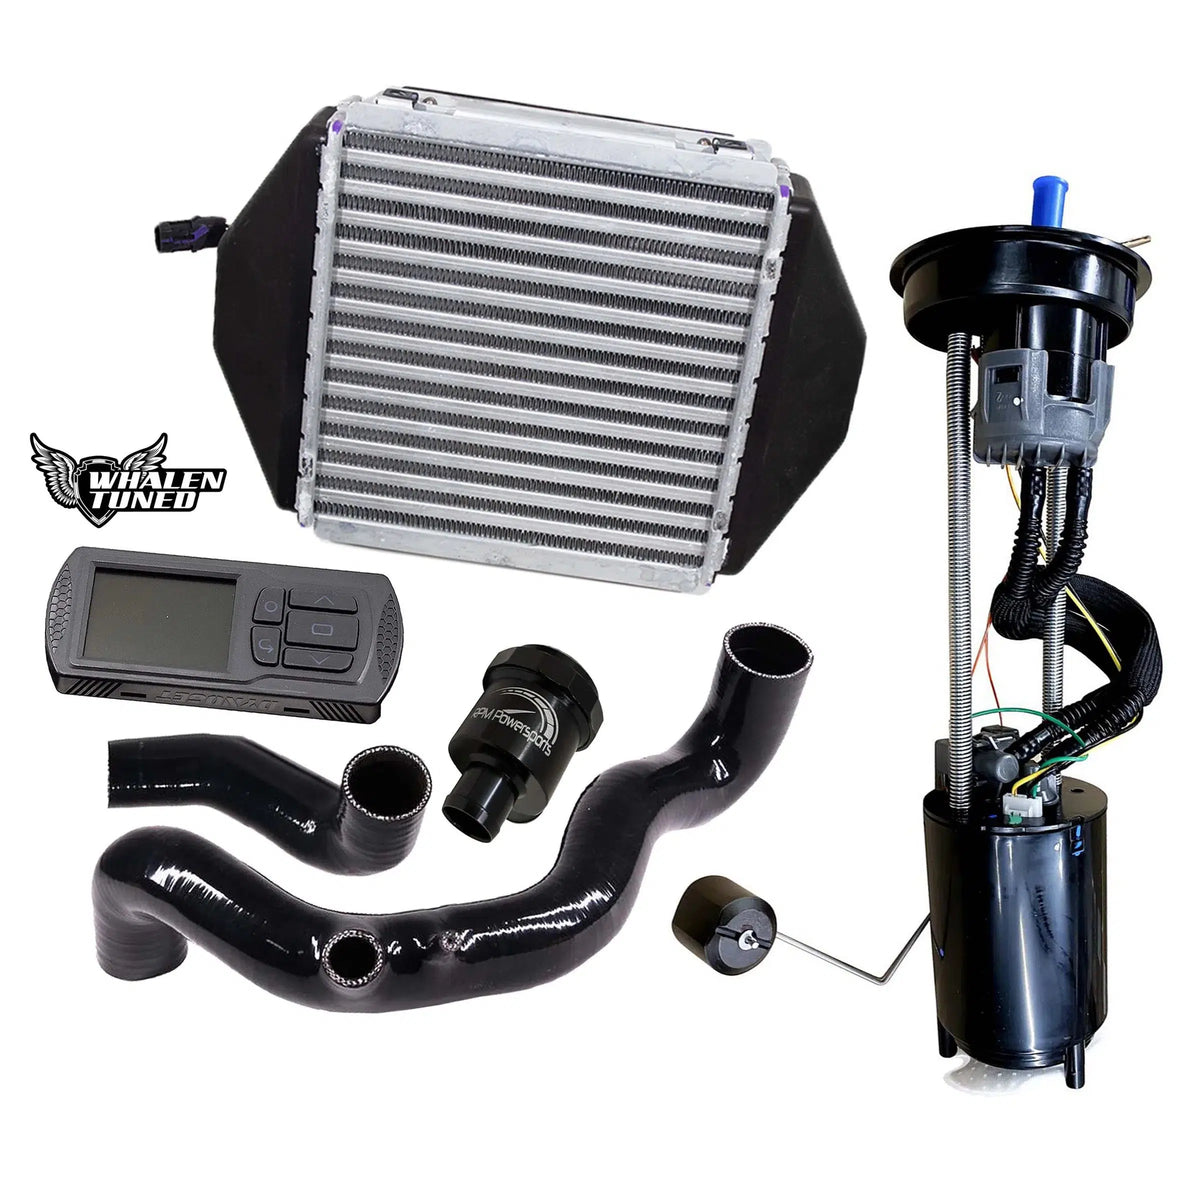 WSRD STOCK INJECTOR TUNING PACKAGES | CAN-AM X3 (177-247HP)-ECU Tune-Whalen-2018-2019 120HP Turbo WS200-DynoJet PV3 Power Vision-Black Market UTV